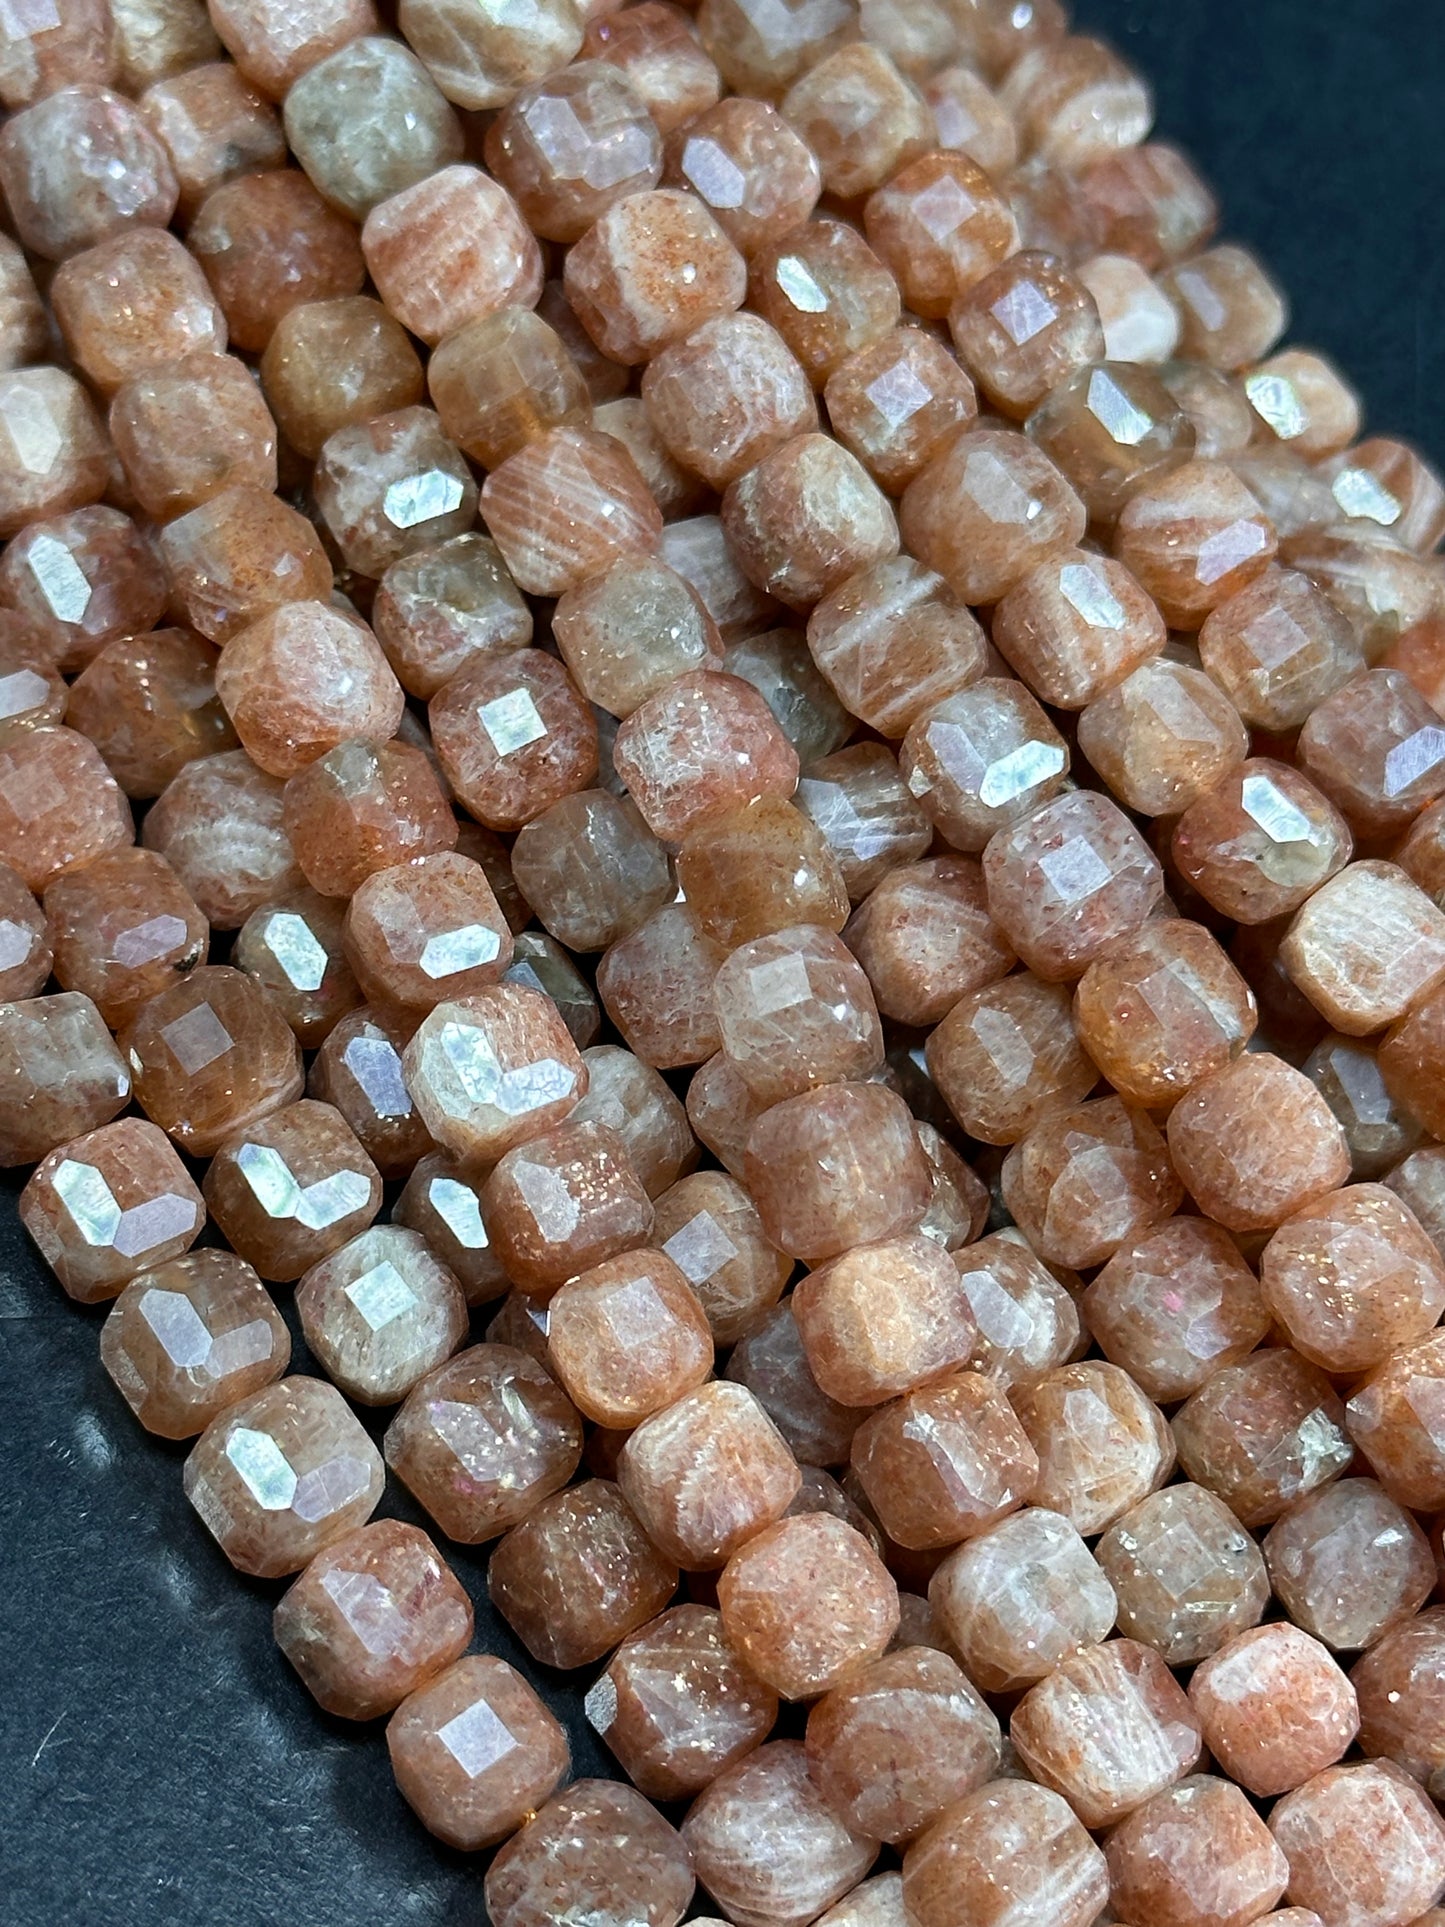 NATURAL Fire Sunstone Gemstone Bead Faceted 8mm Cube Shape, Gorgeous Peach Orange Color Loose Fire Sunstone Beads. 15.5" Full strand